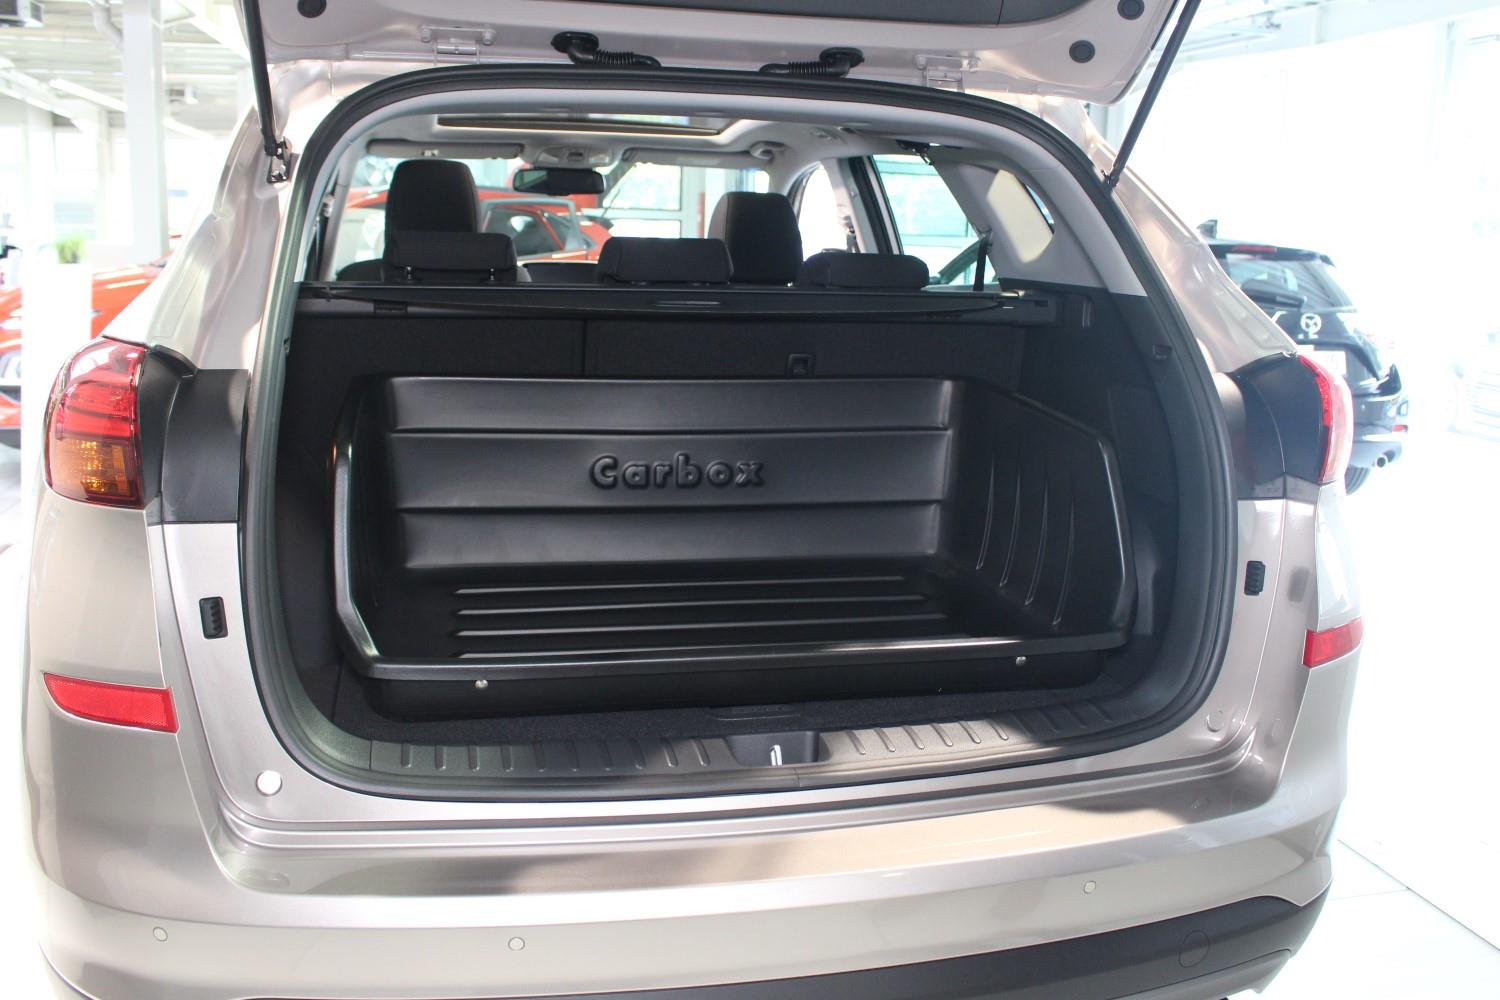 https://www.petwareshop.com/images/stories/virtuemart/product/hyu5tucc-hyundai-tucson-tl-2015-carbox-classic-yoursize-high-sided-boot-liner-1.jpg